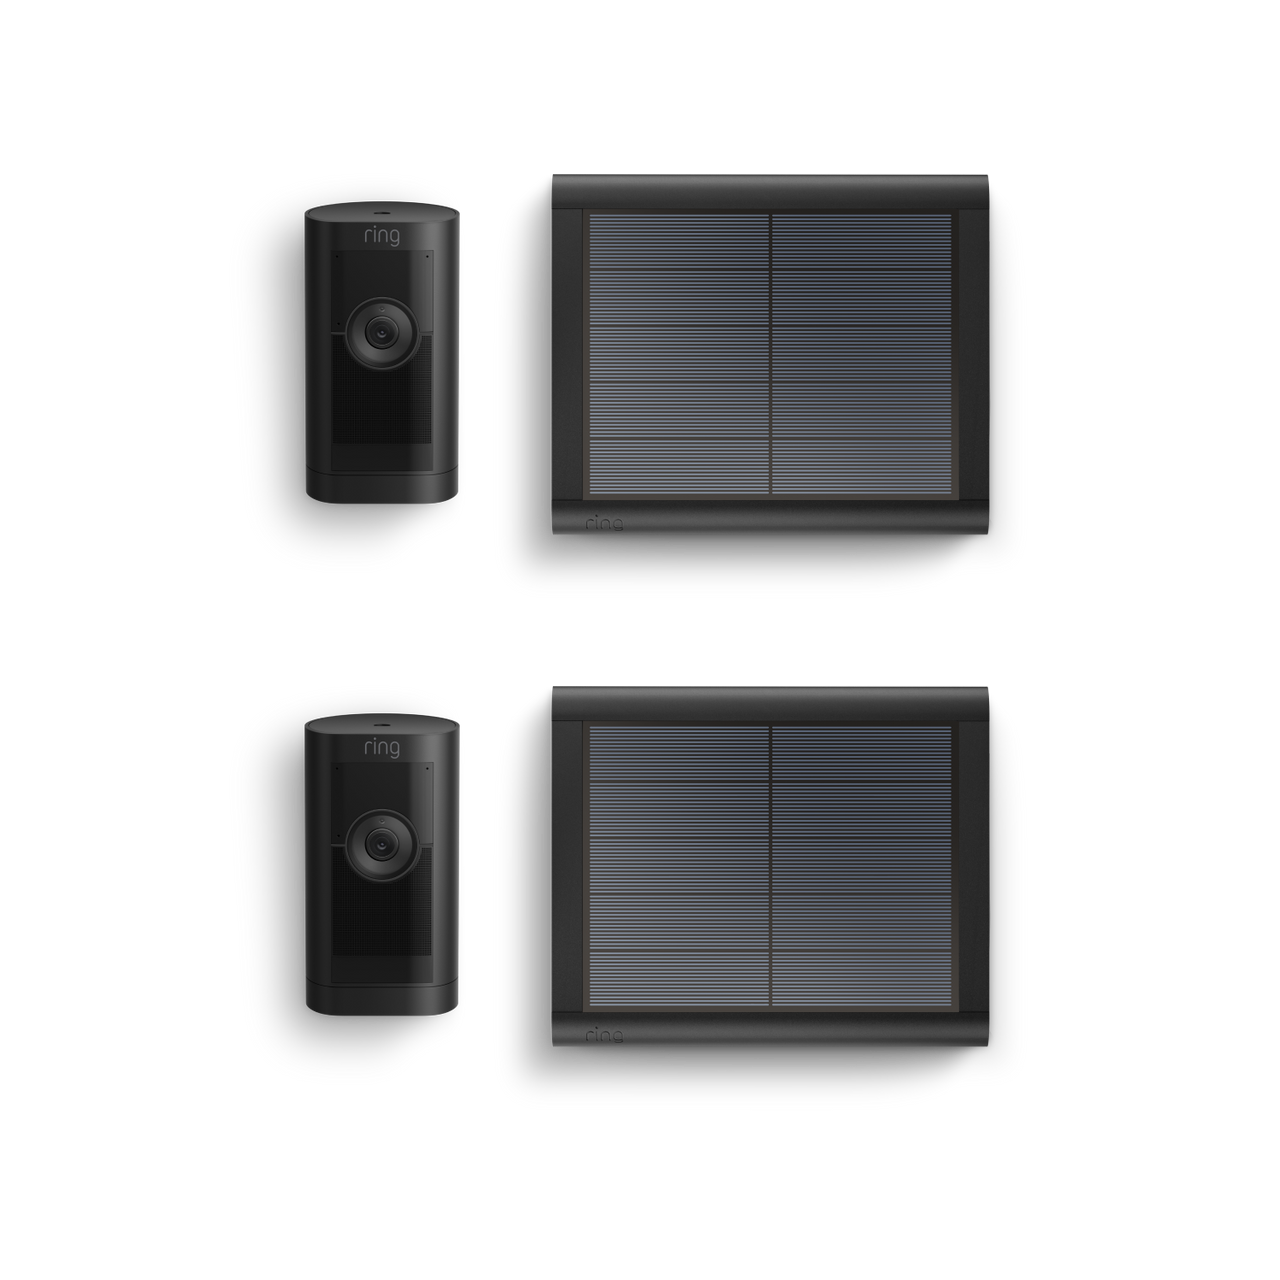 files/ring_stick-up-cam-pro-solar_blk_2pk_01_product_angle_wall_1500x1500_c5951bb0-7f7c-4785-8375-73441395d0d2.png